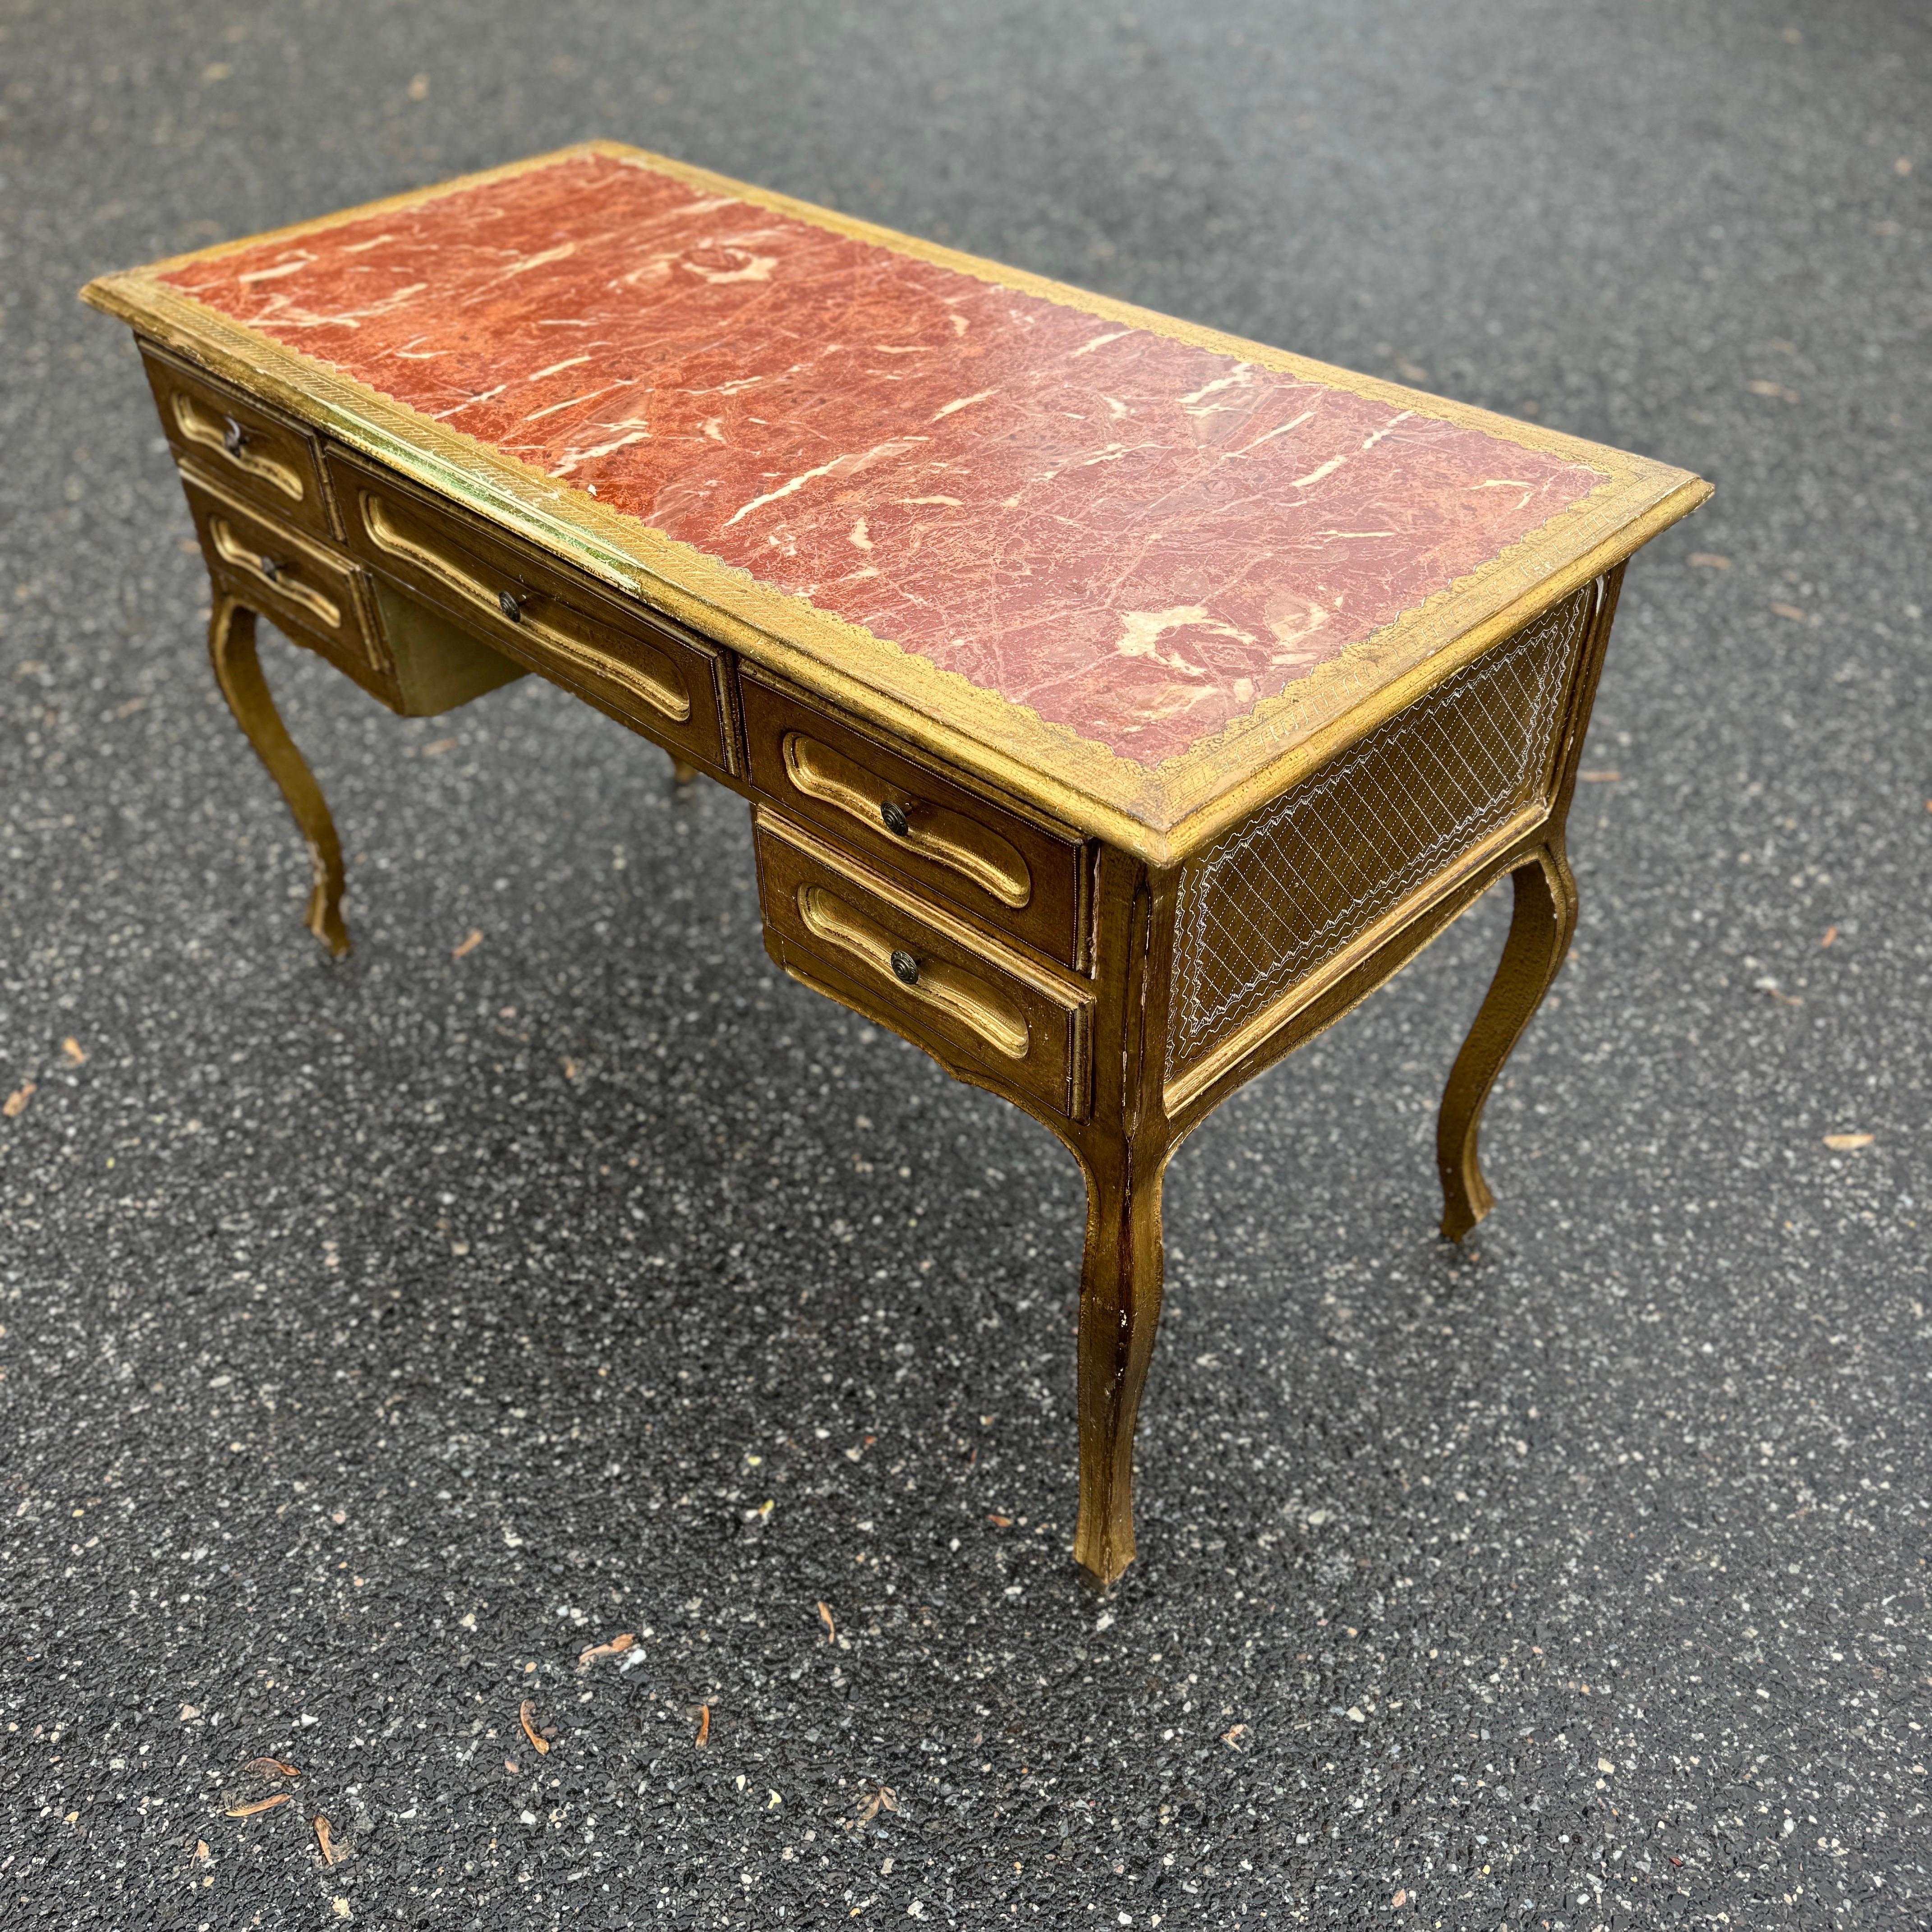 Hand-Crafted Italian Mid-Century Florentine Gilt Desk with Drawers For Sale